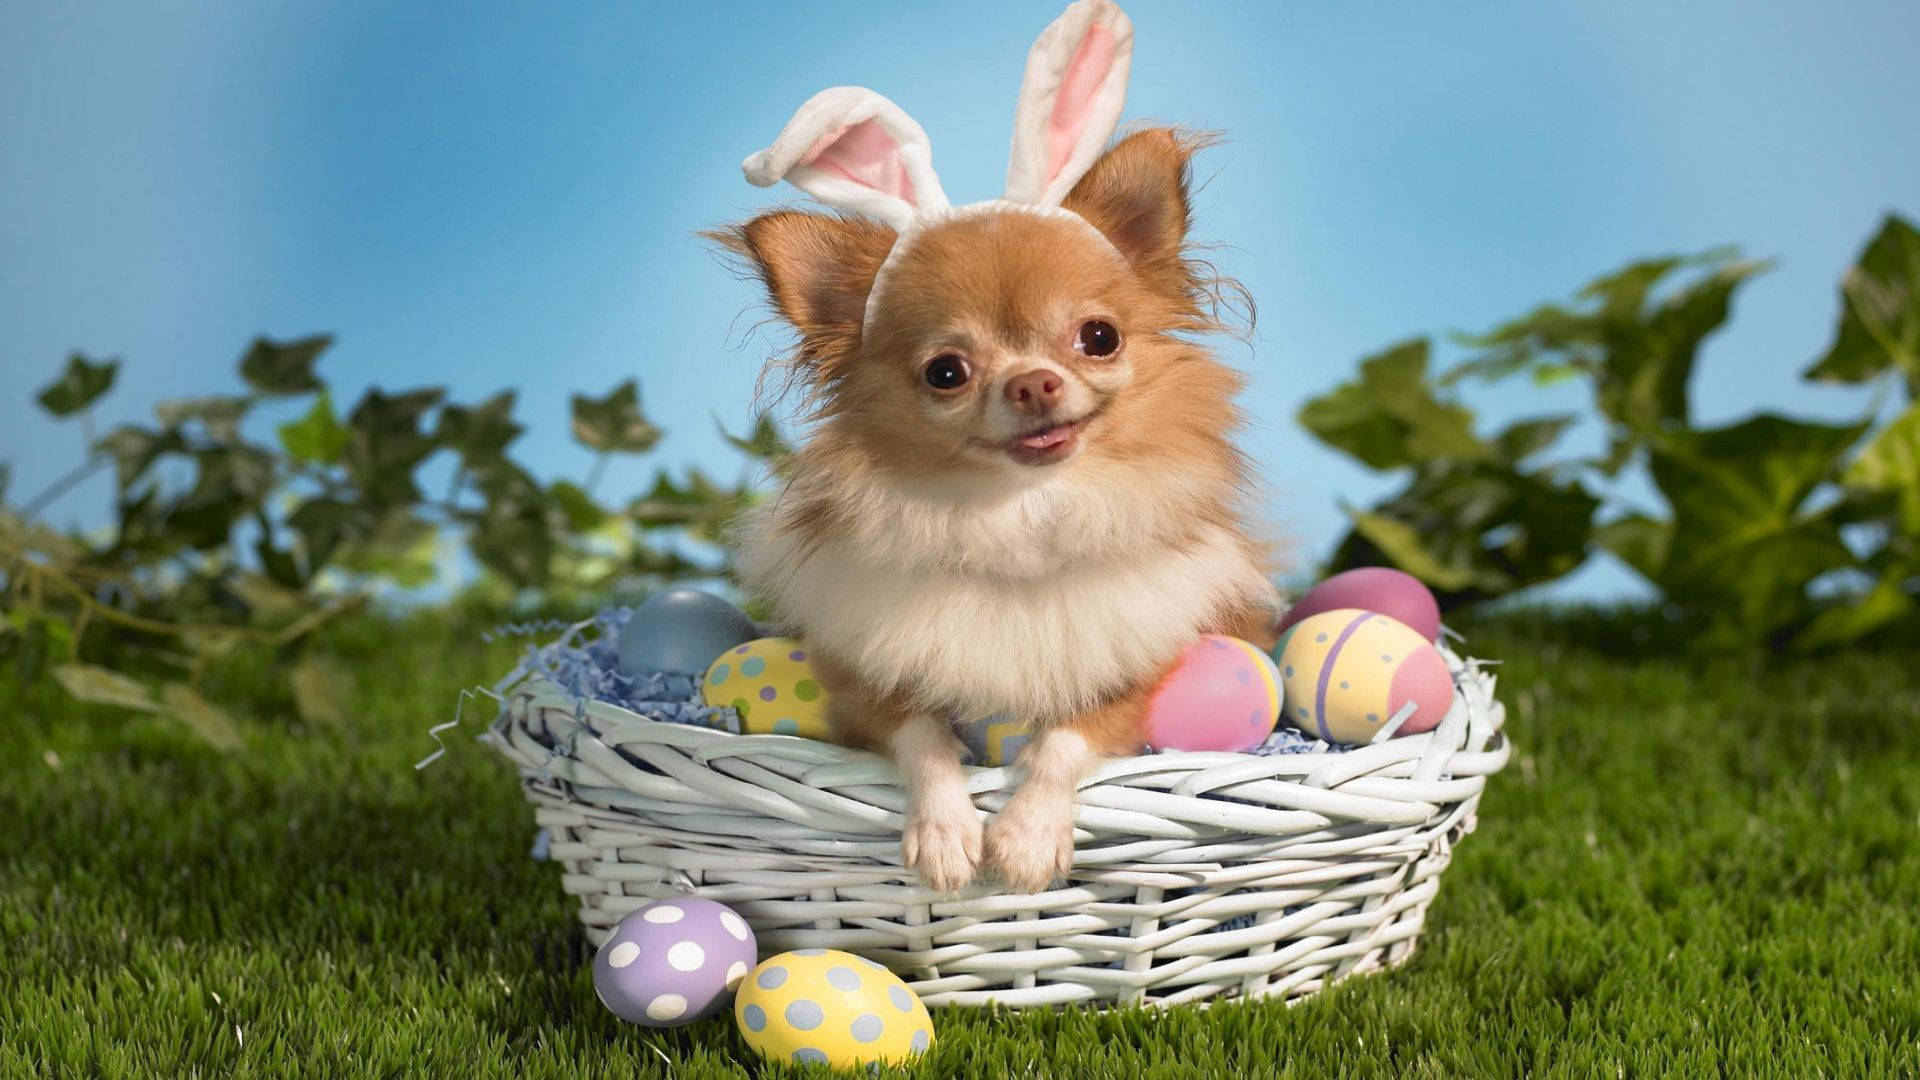 Celebrate Easter In Style With This Adorable Chihuahua Background